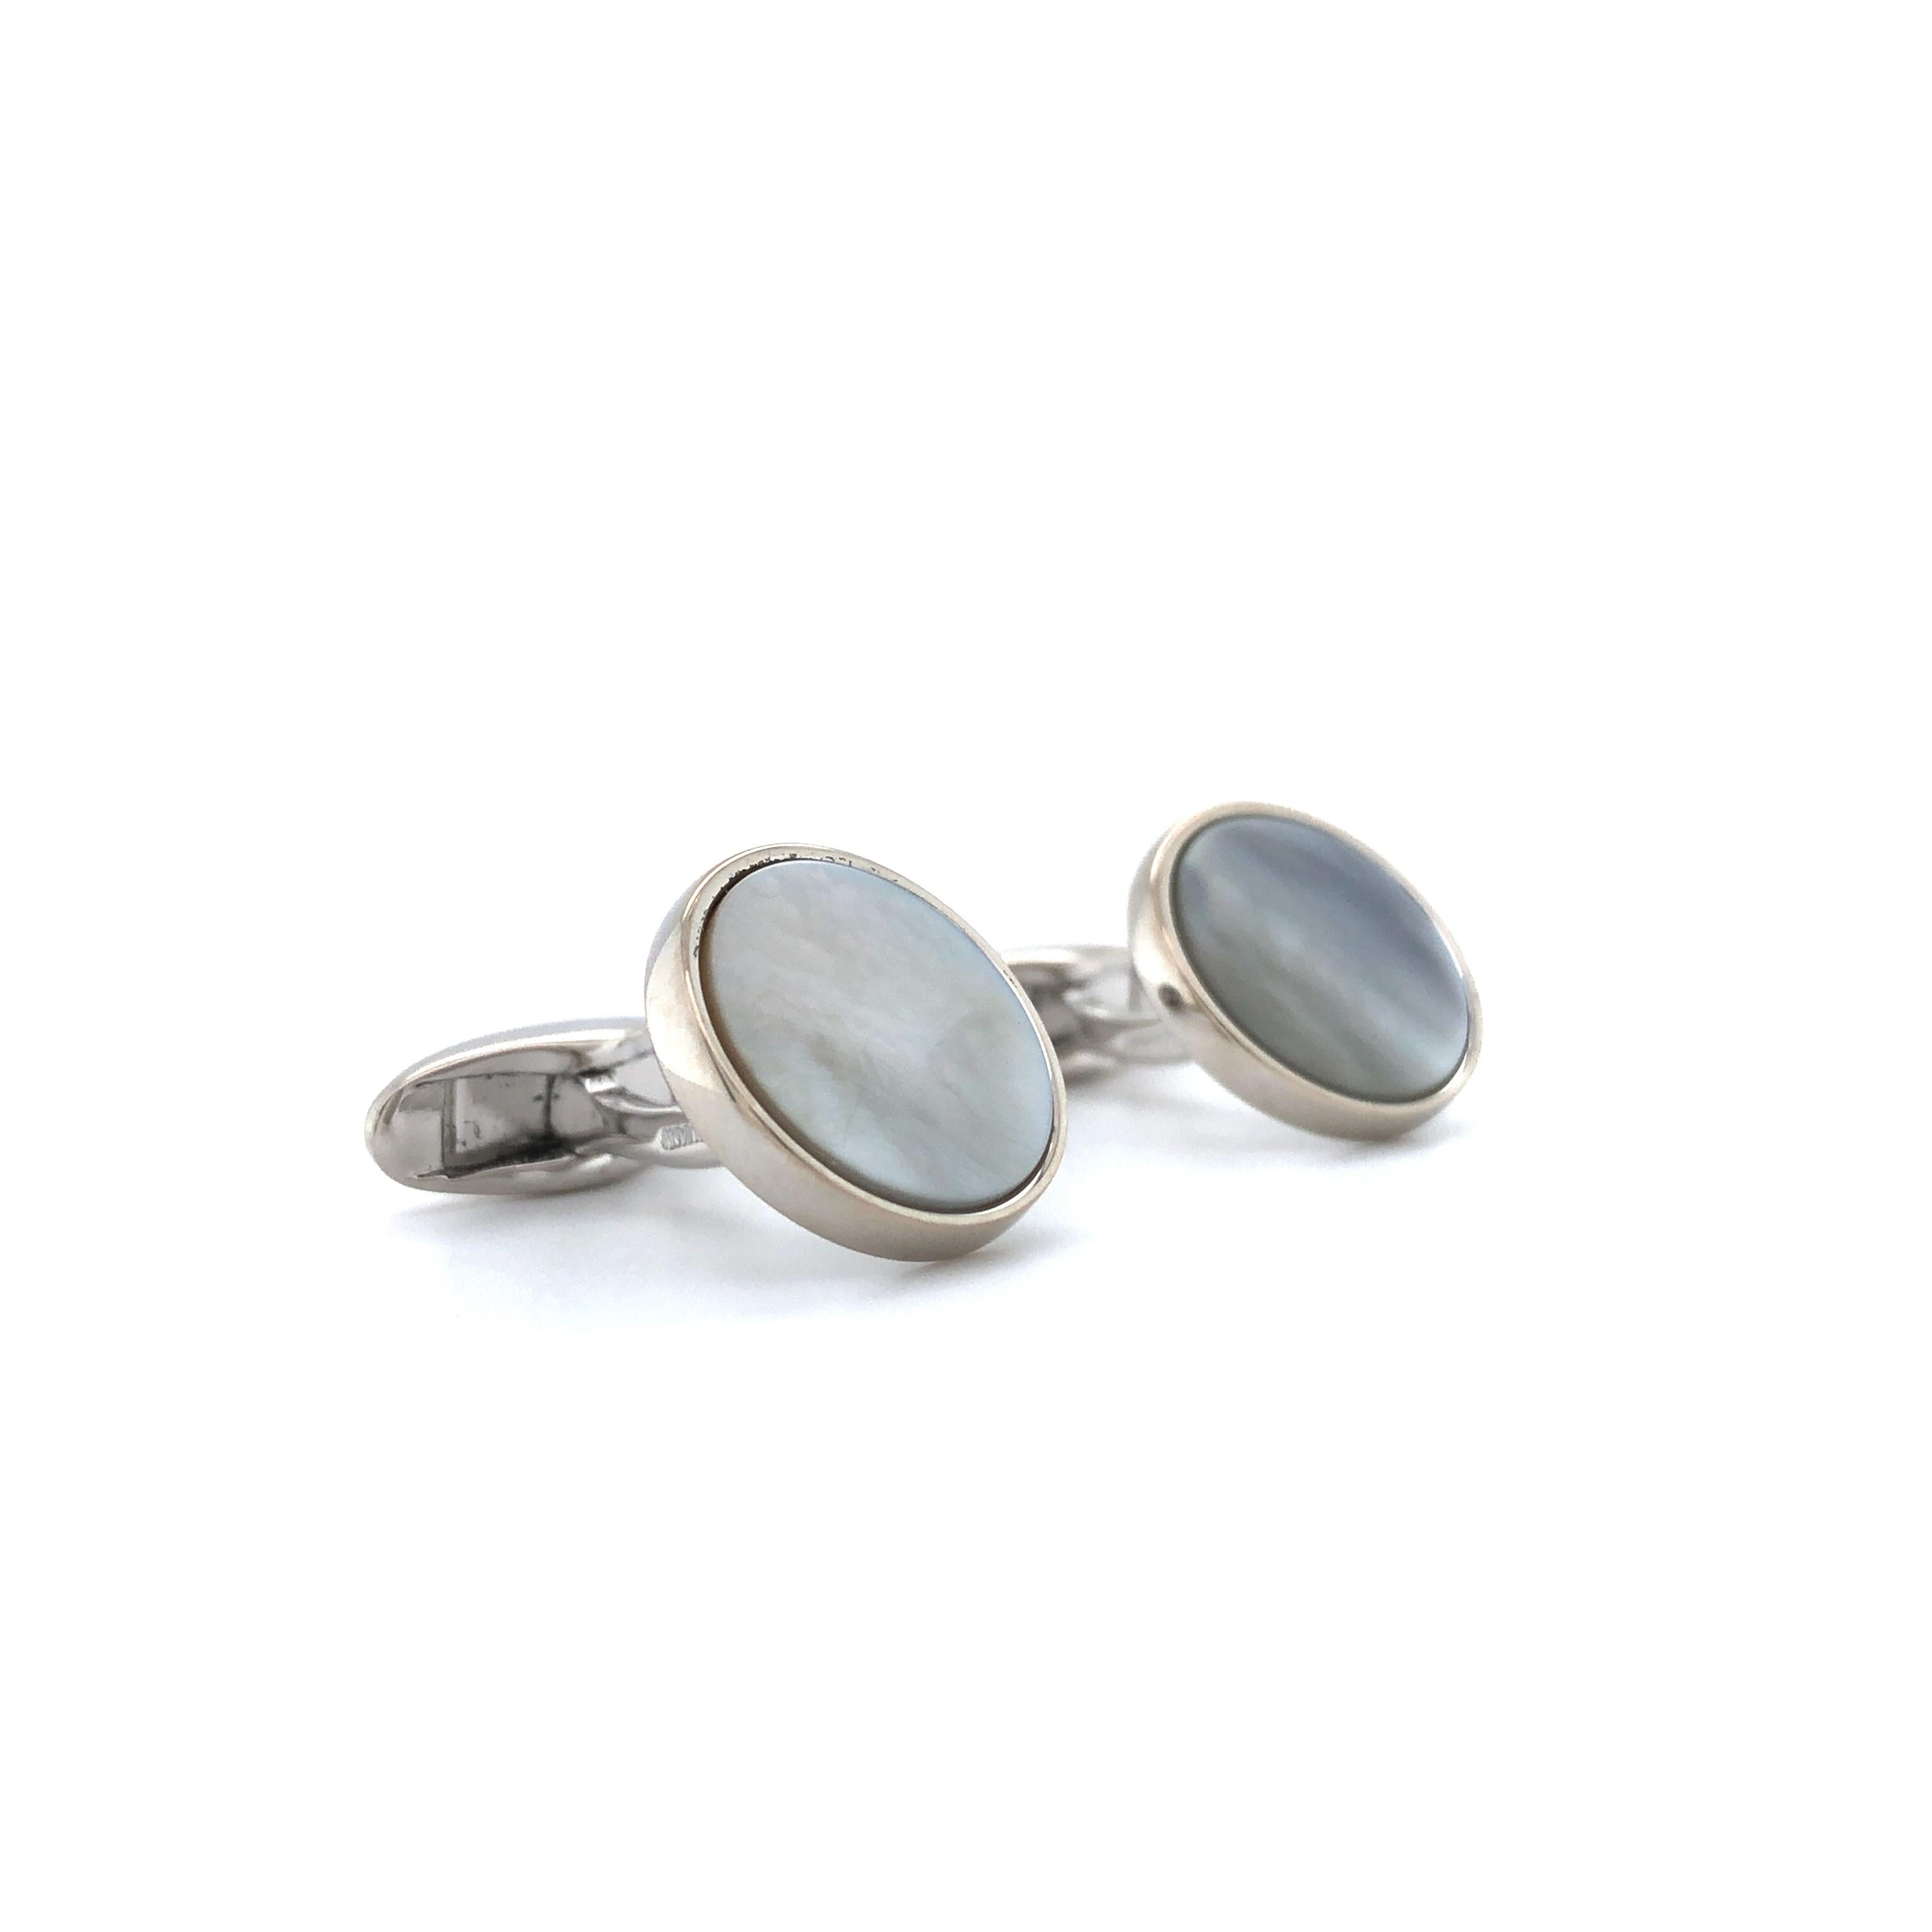 Round Cufflinks - 925 Sterling Silver - Mother of Pearl Inlay - Diameter 15 mm In New Condition For Sale In Pforzheim, DE